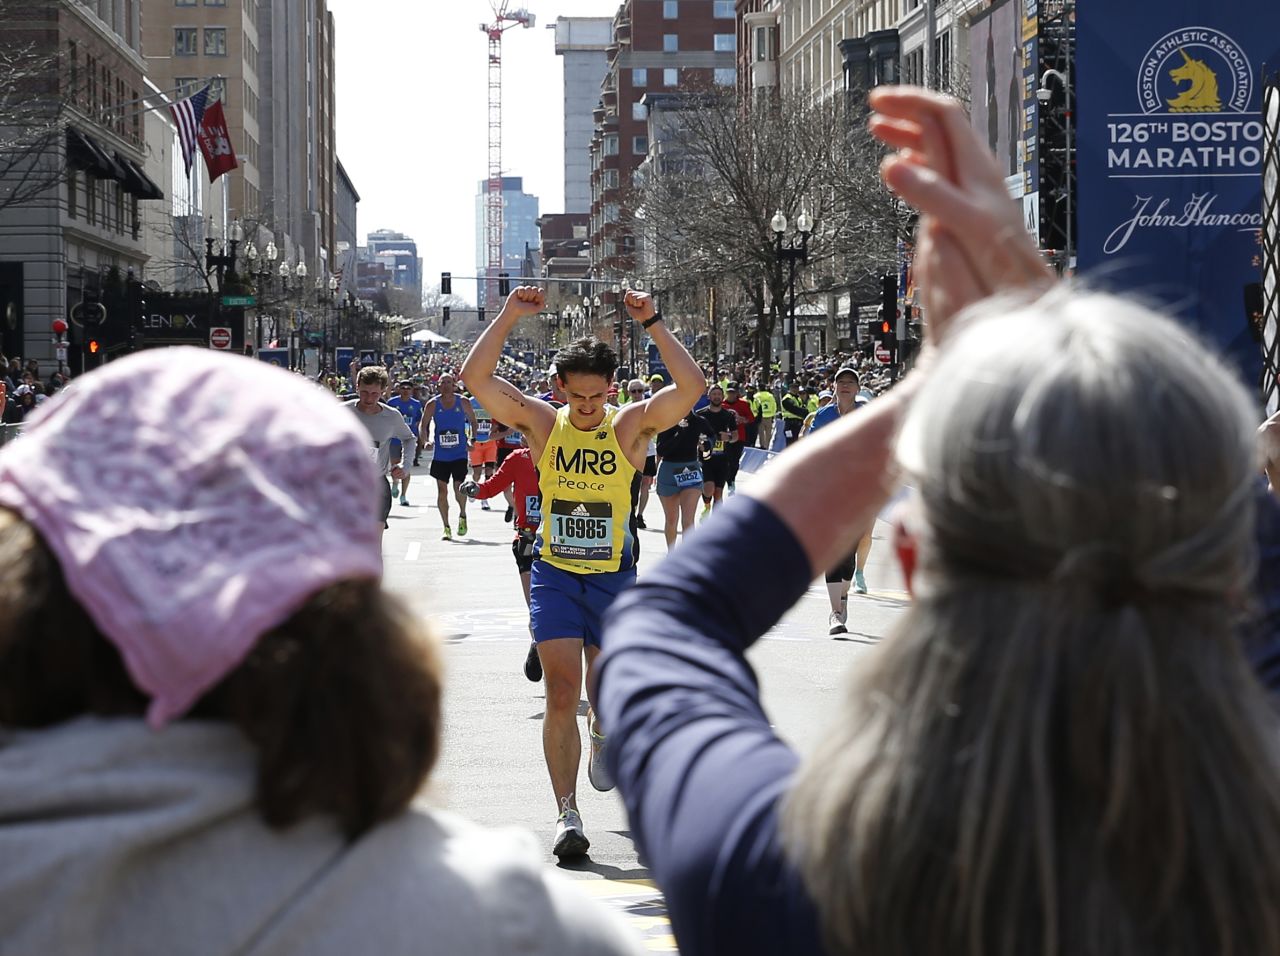 Henry Richard is cheered on by his sister, Jane, and his mother, Denise, as he finishes the Boston Marathon on Monday, April 18. His younger brother, Martin, <a href="https://www.bostonglobe.com/2022/04/18/metro/20-year-old-henry-richard-older-brother-martin-richard-running-boston-marathon-today/" target="_blank" target="_blank">was killed in the 2013 Boston Marathon bombings.</a> Jane lost a leg in the attack.